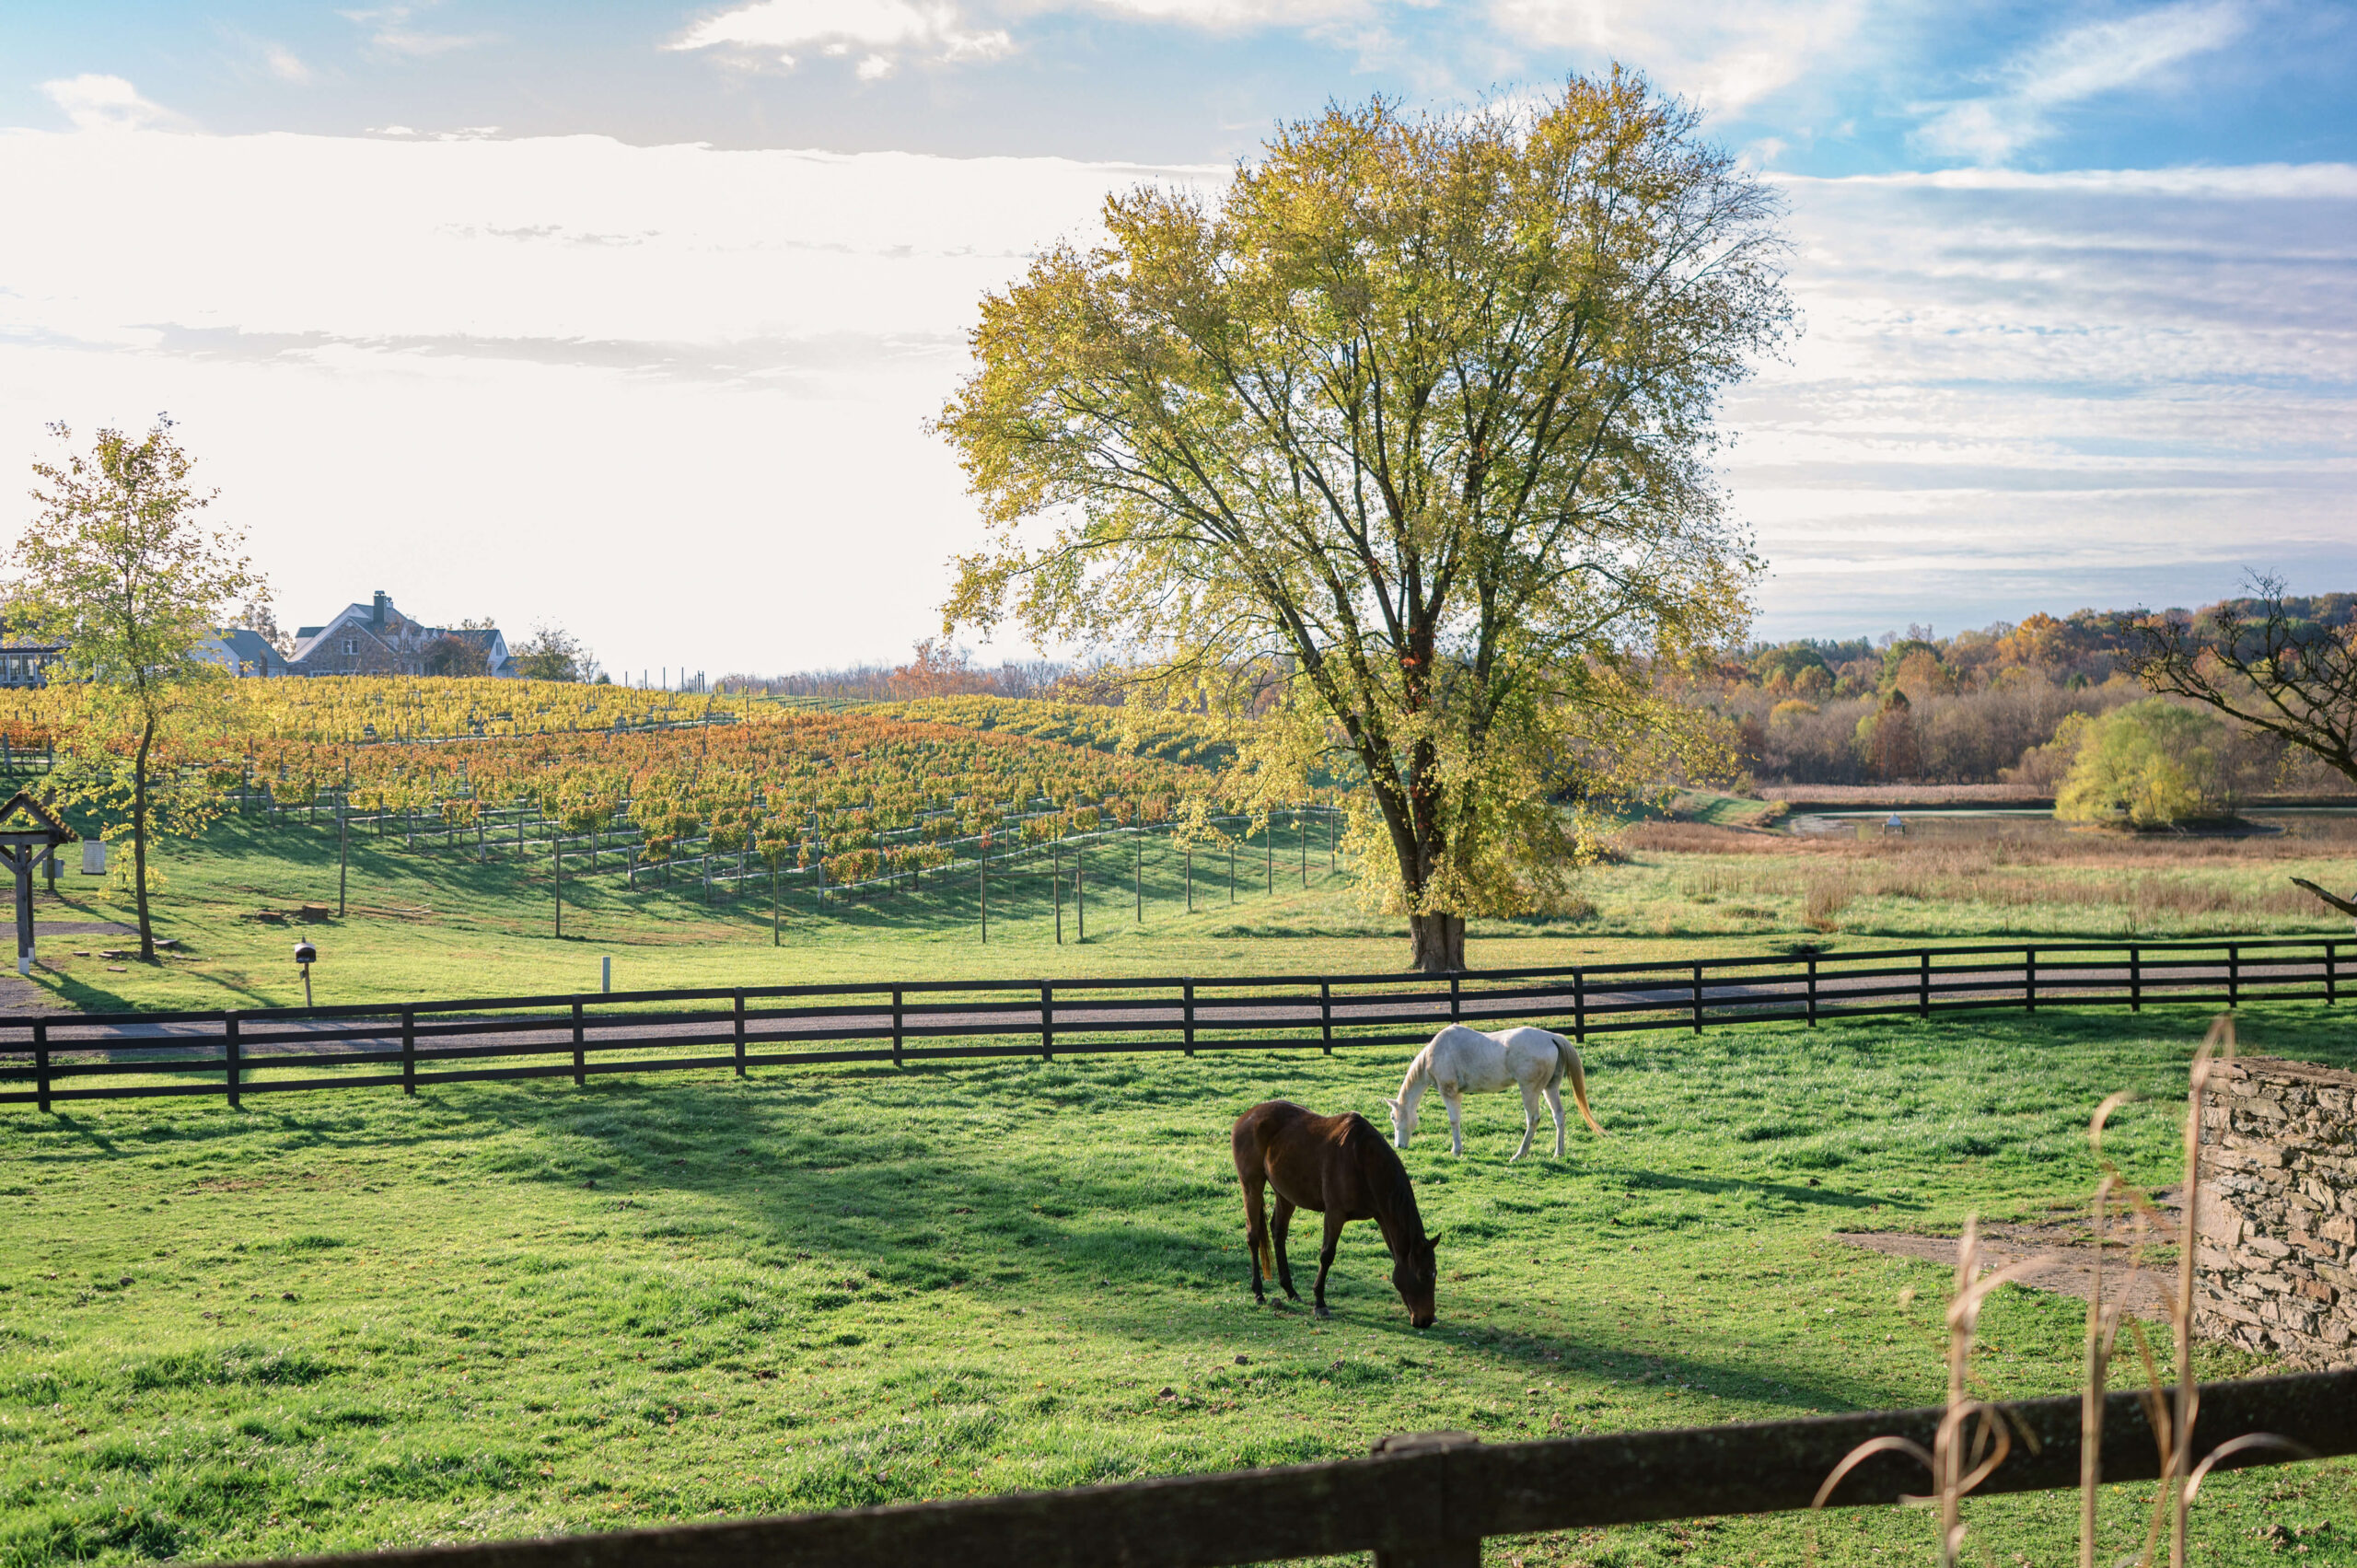 Horses graze in the pastures at the Tranquility Farm Wedding Venue